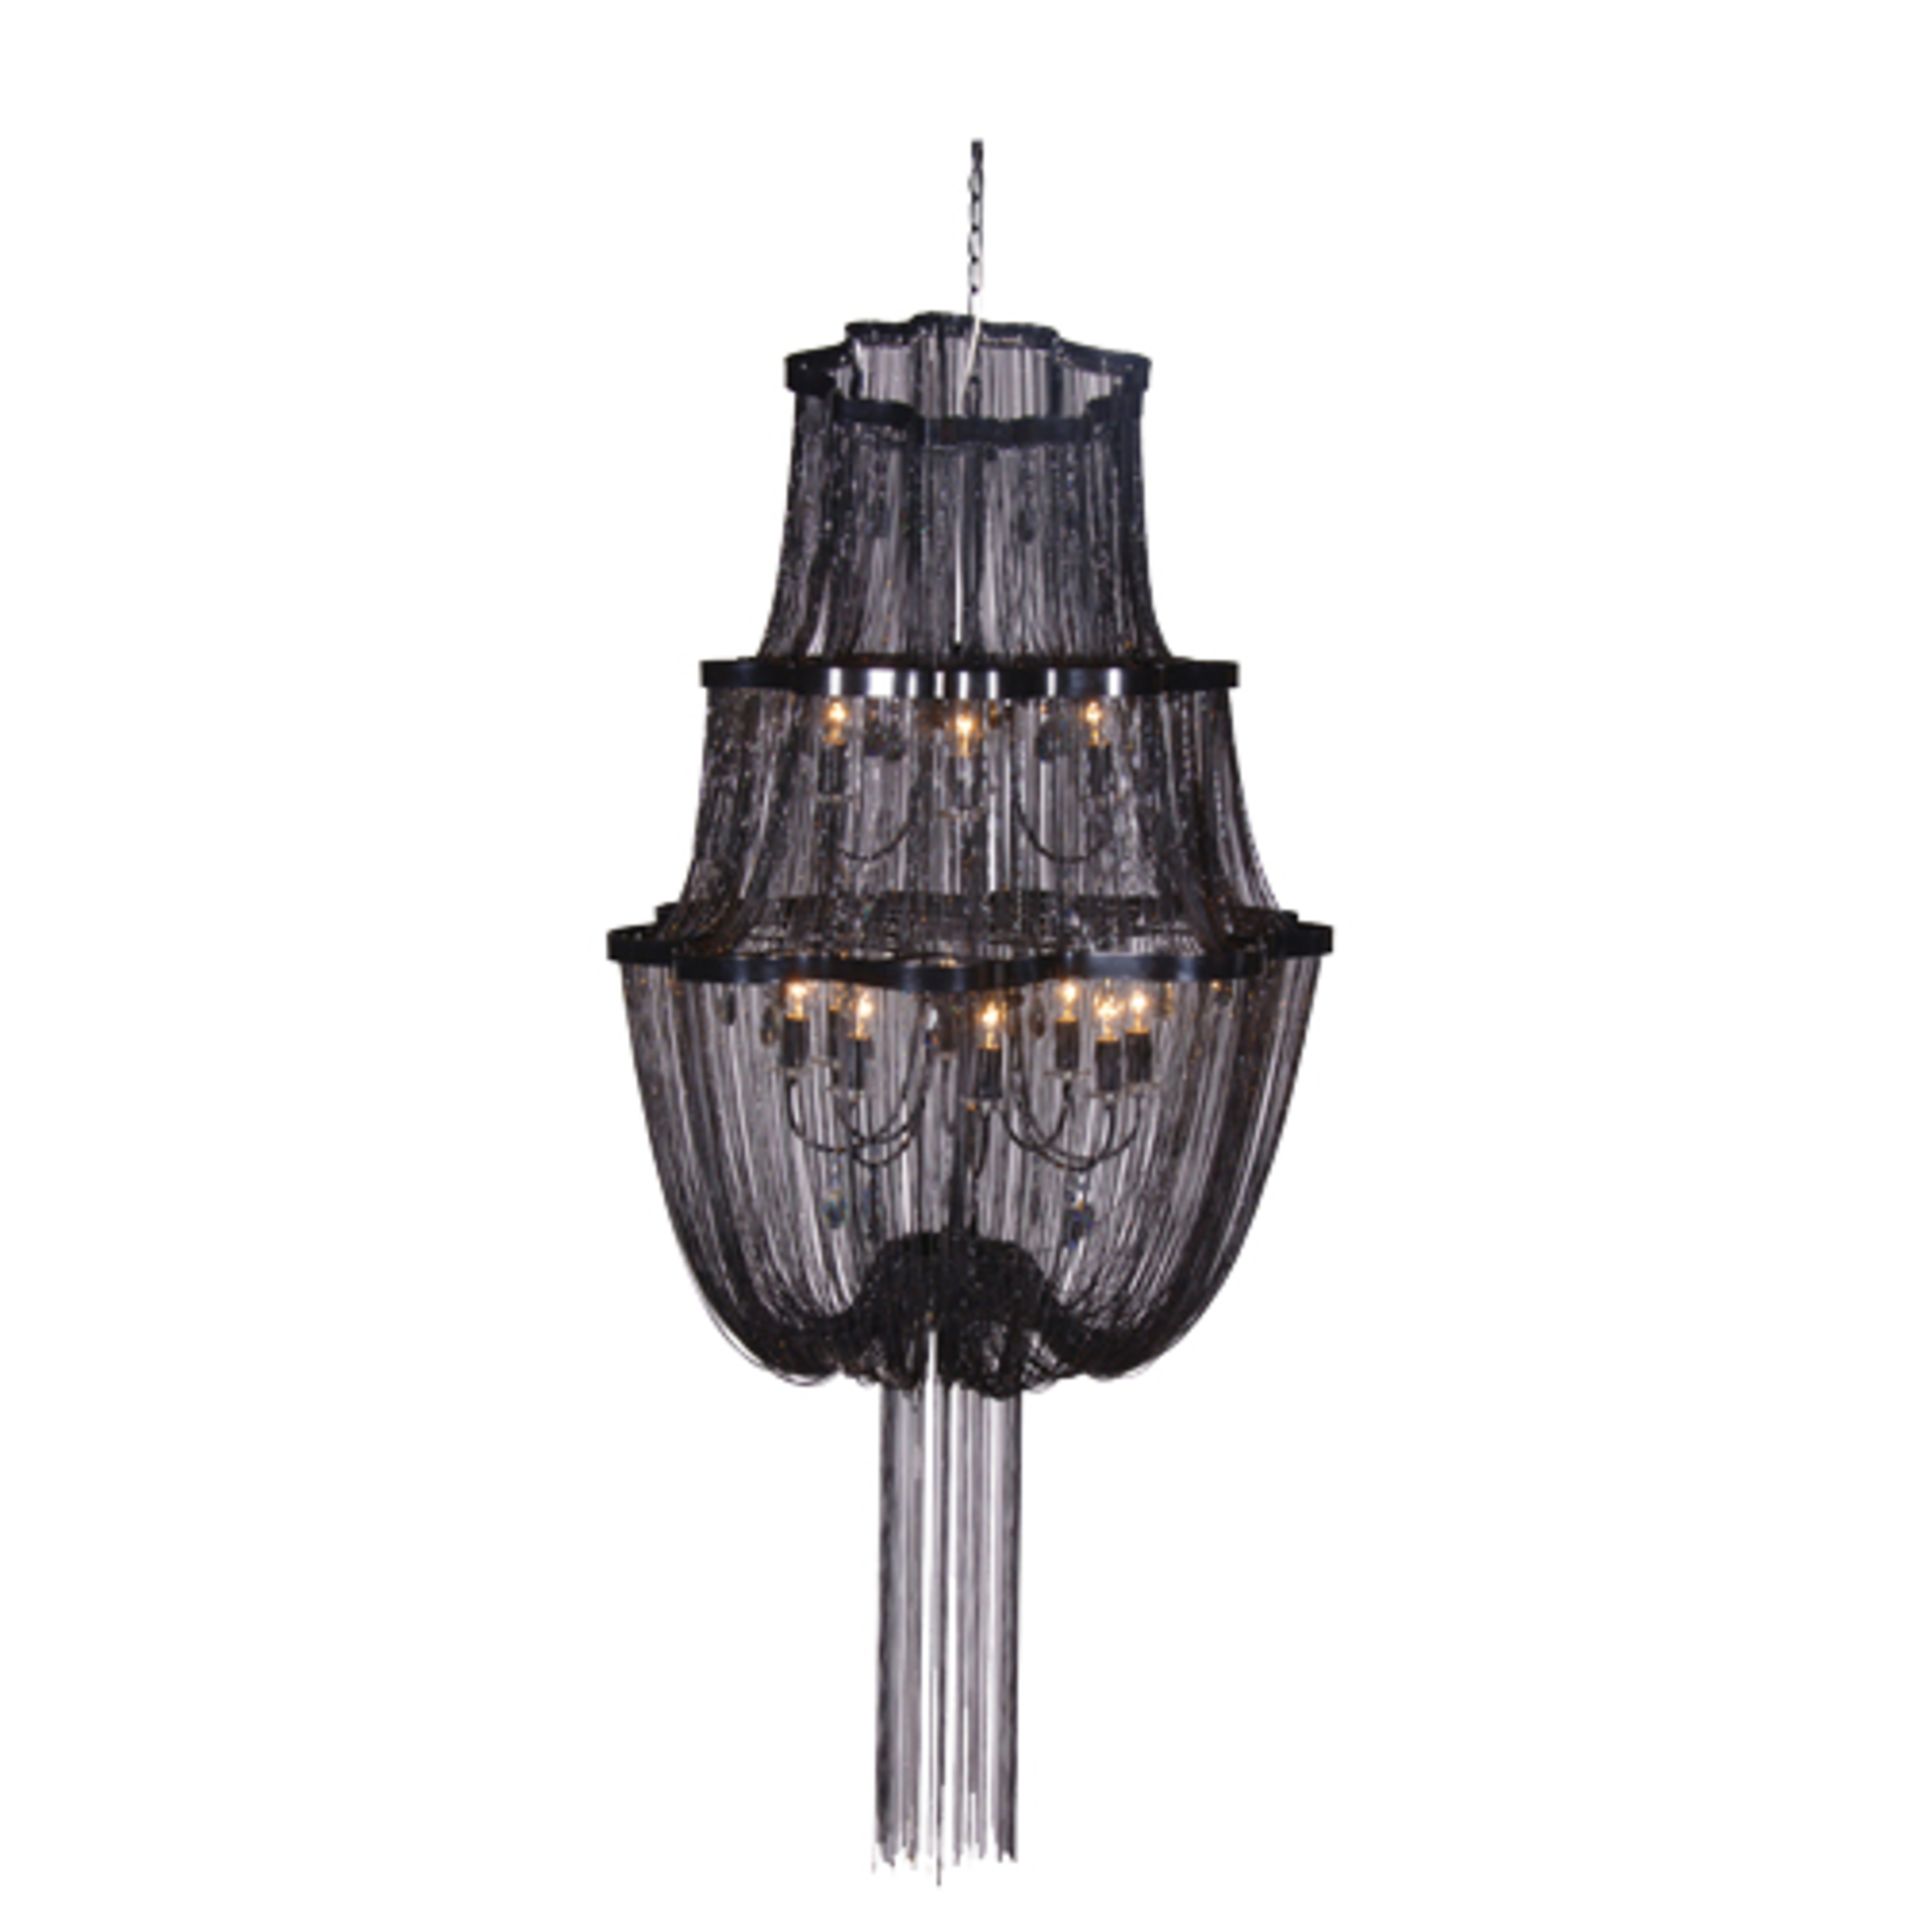 1 x Large Tiered Black Chain Chandelier - Size: Height Approx 200cm  - Ref: DE030 (RM1) - CL122 -